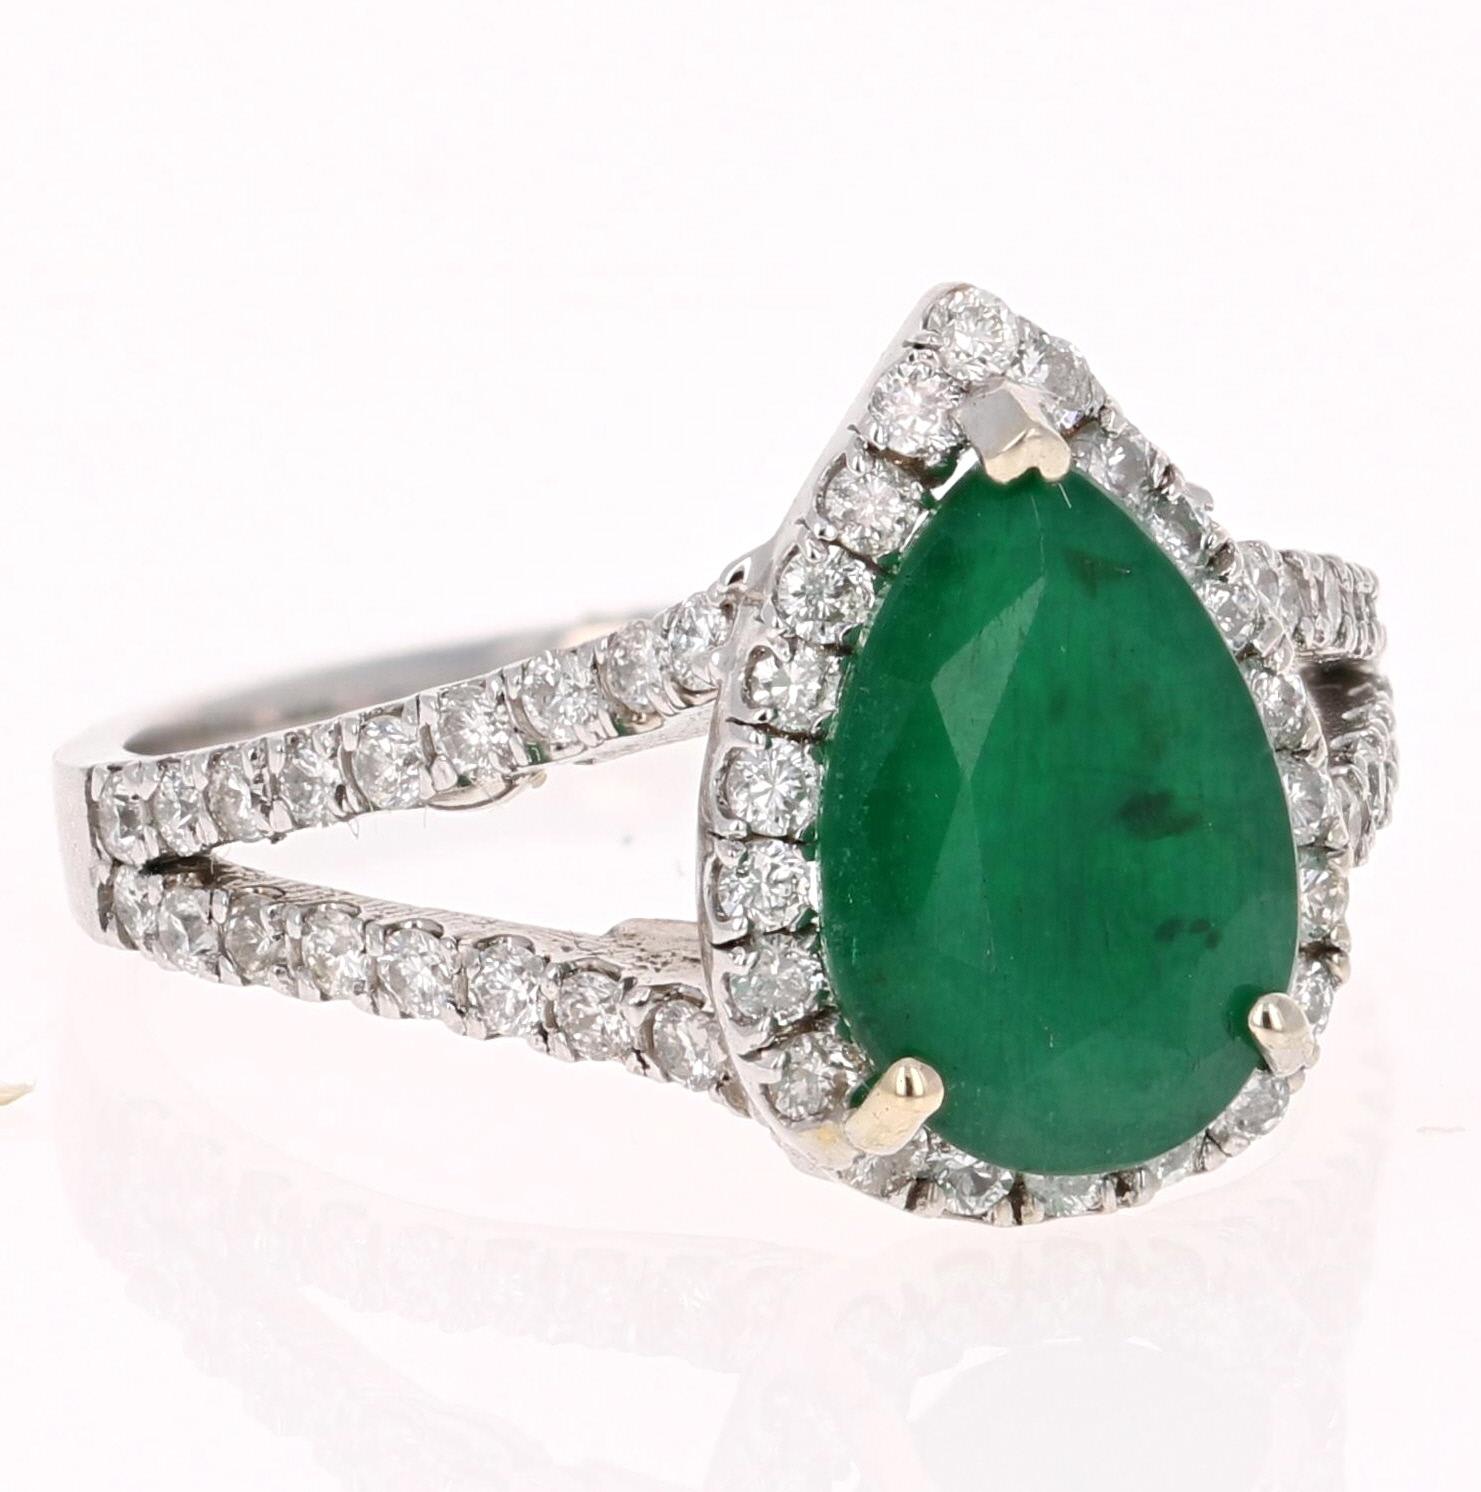 Beautiful Emerald Diamond ring with an eye catching Halo! A unique way to propose and add color to your life! 

The Pear Cut Emerald is 2.19 Carats and is surrounded by 66 Round Cut Diamonds at 0.65 Carats. The Clarity and Color of the Diamonds are